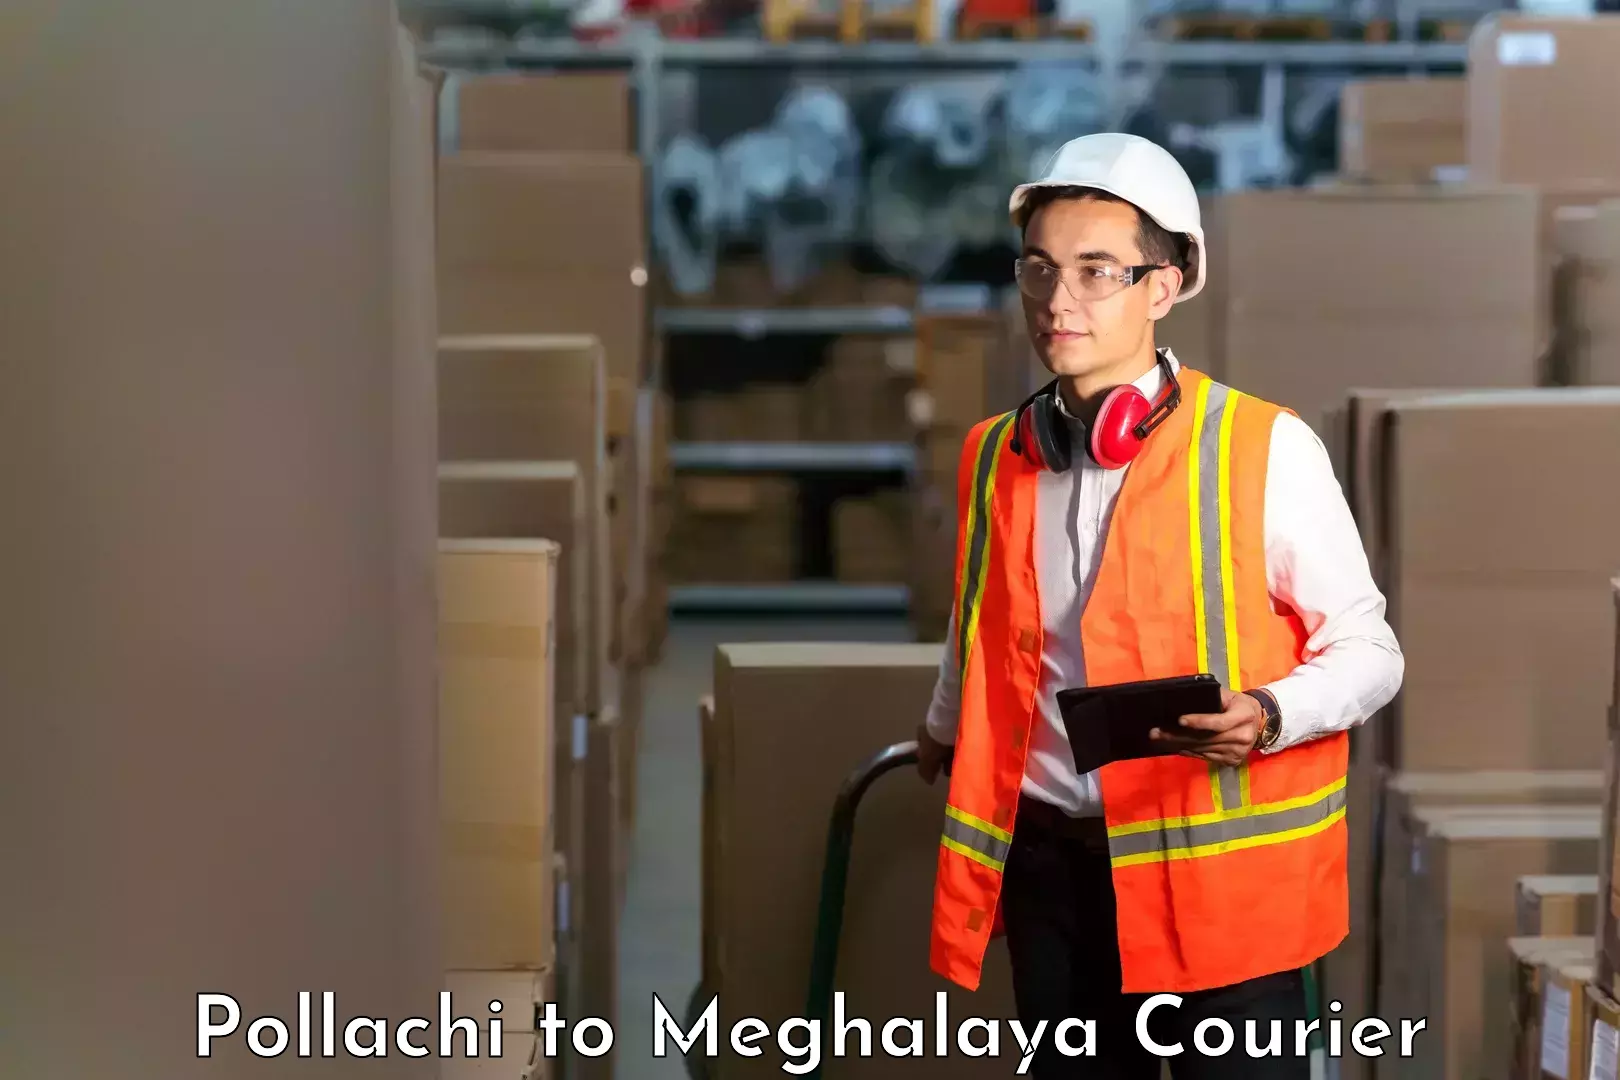 Cash on delivery service Pollachi to Meghalaya